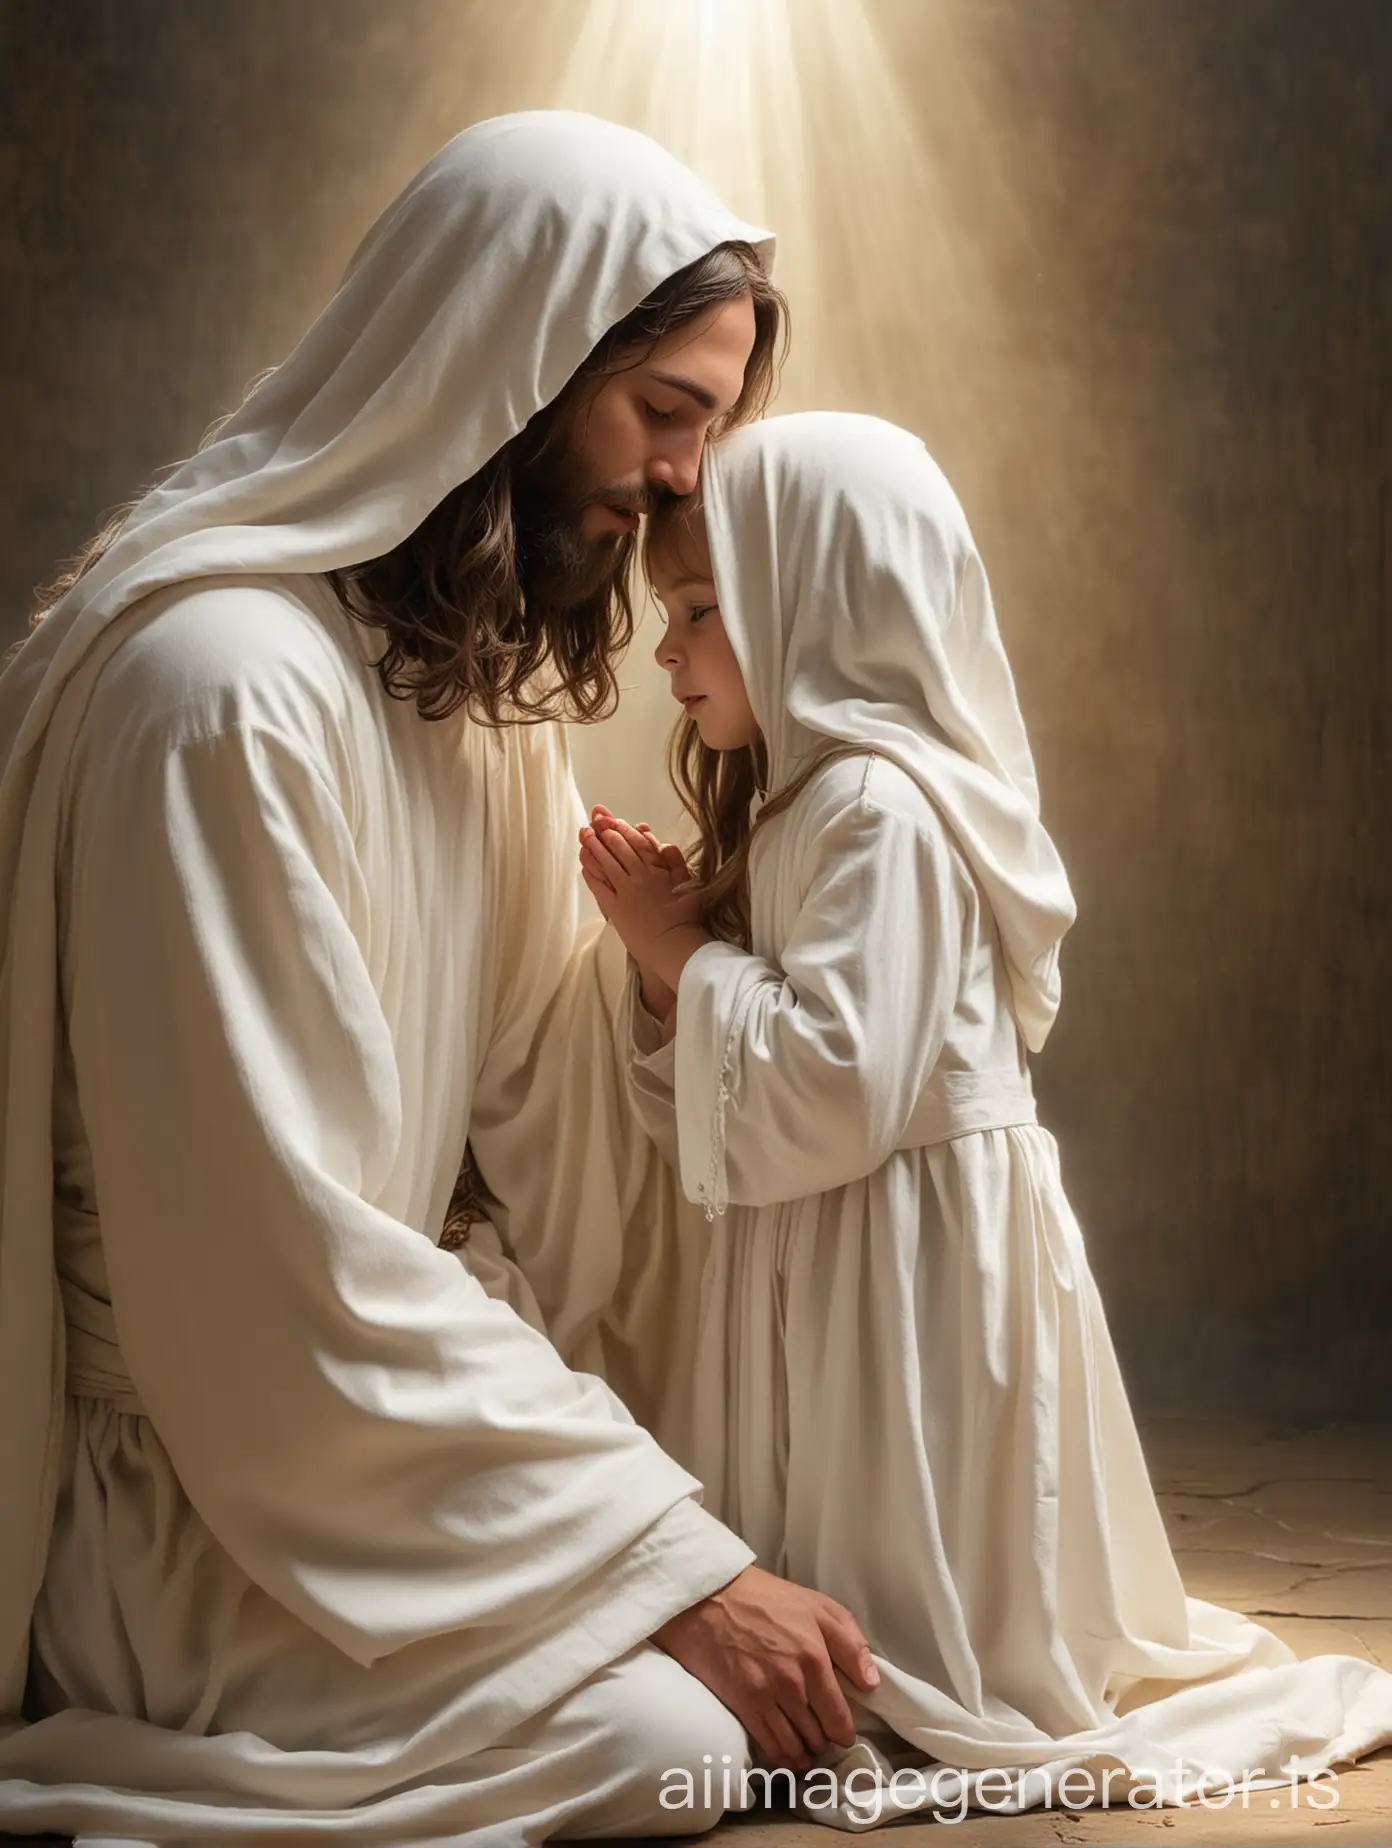 Jesus Christ kneeled down hugging a little girl. Jesus Christ and the little girl are looking at each other and Jesus Christ is wearing a white hood that covers his face and only allows the viewer to see his hair and light coming out of it.